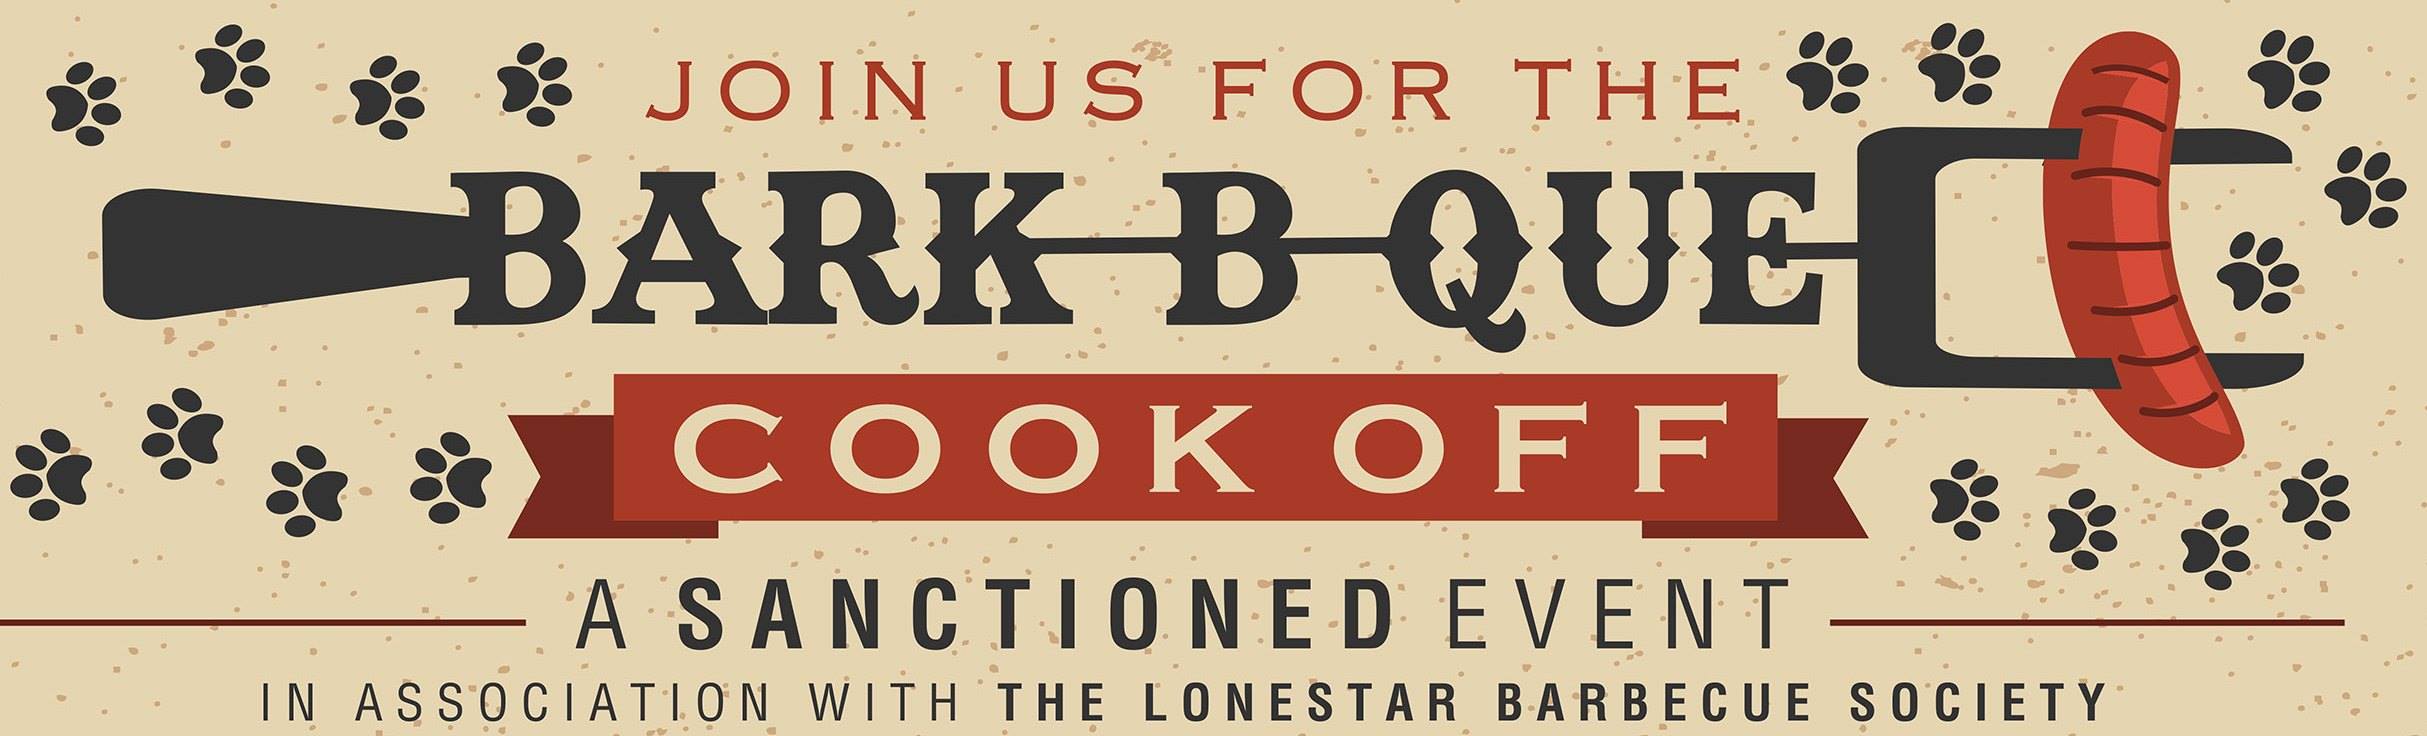 Bark-B-Que Cook Off Vendor Booth fees to help the animals at Taylor Texas shelter